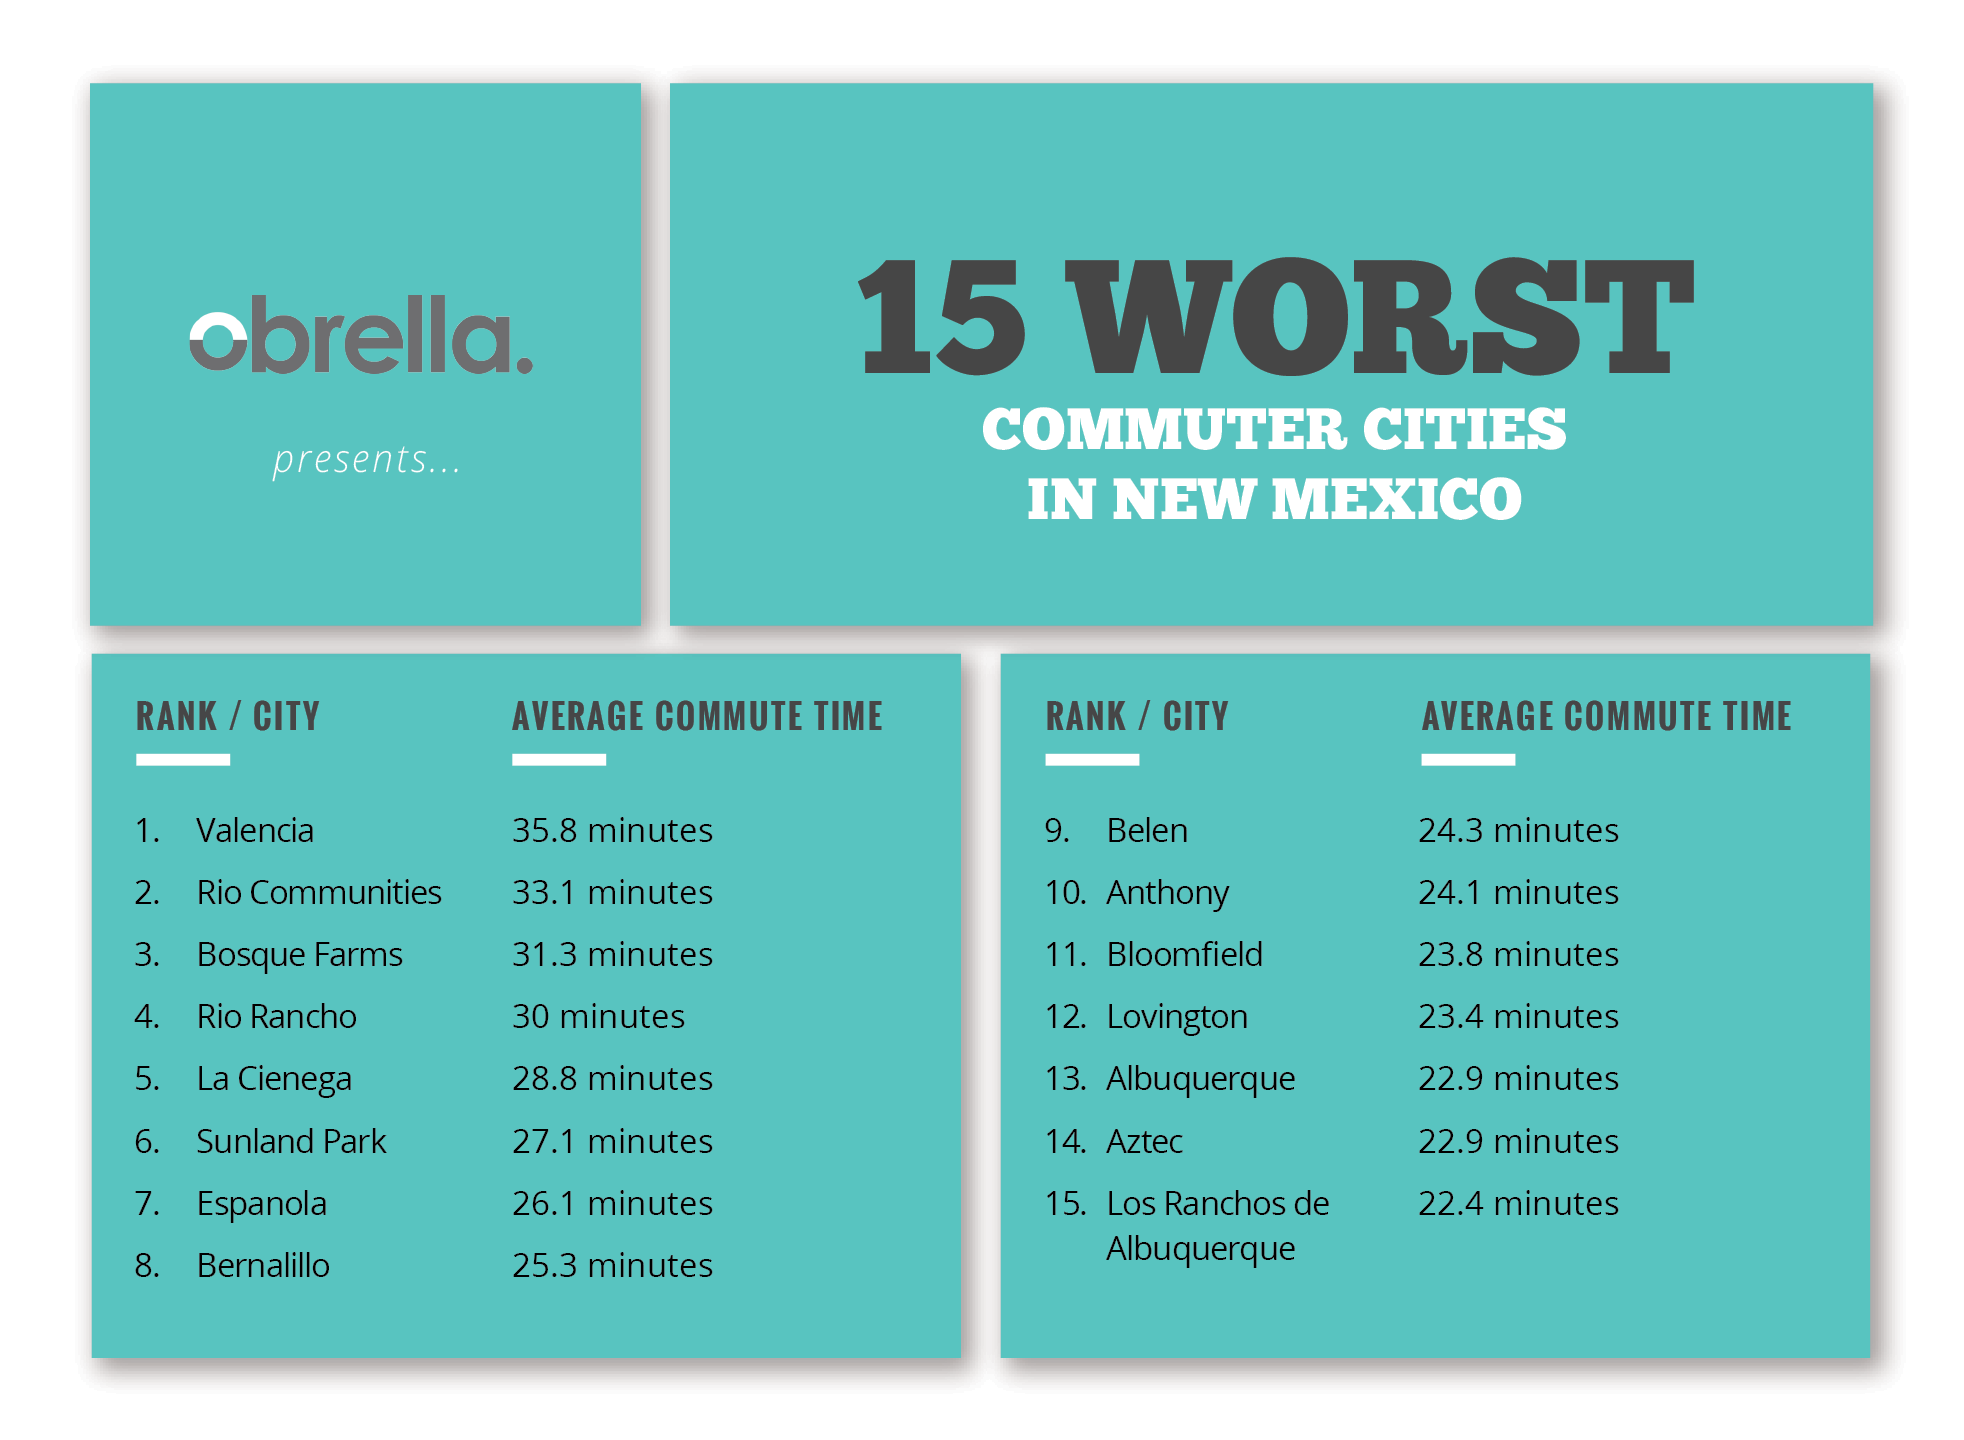 15 Worst Commuter Cities in New Mexico